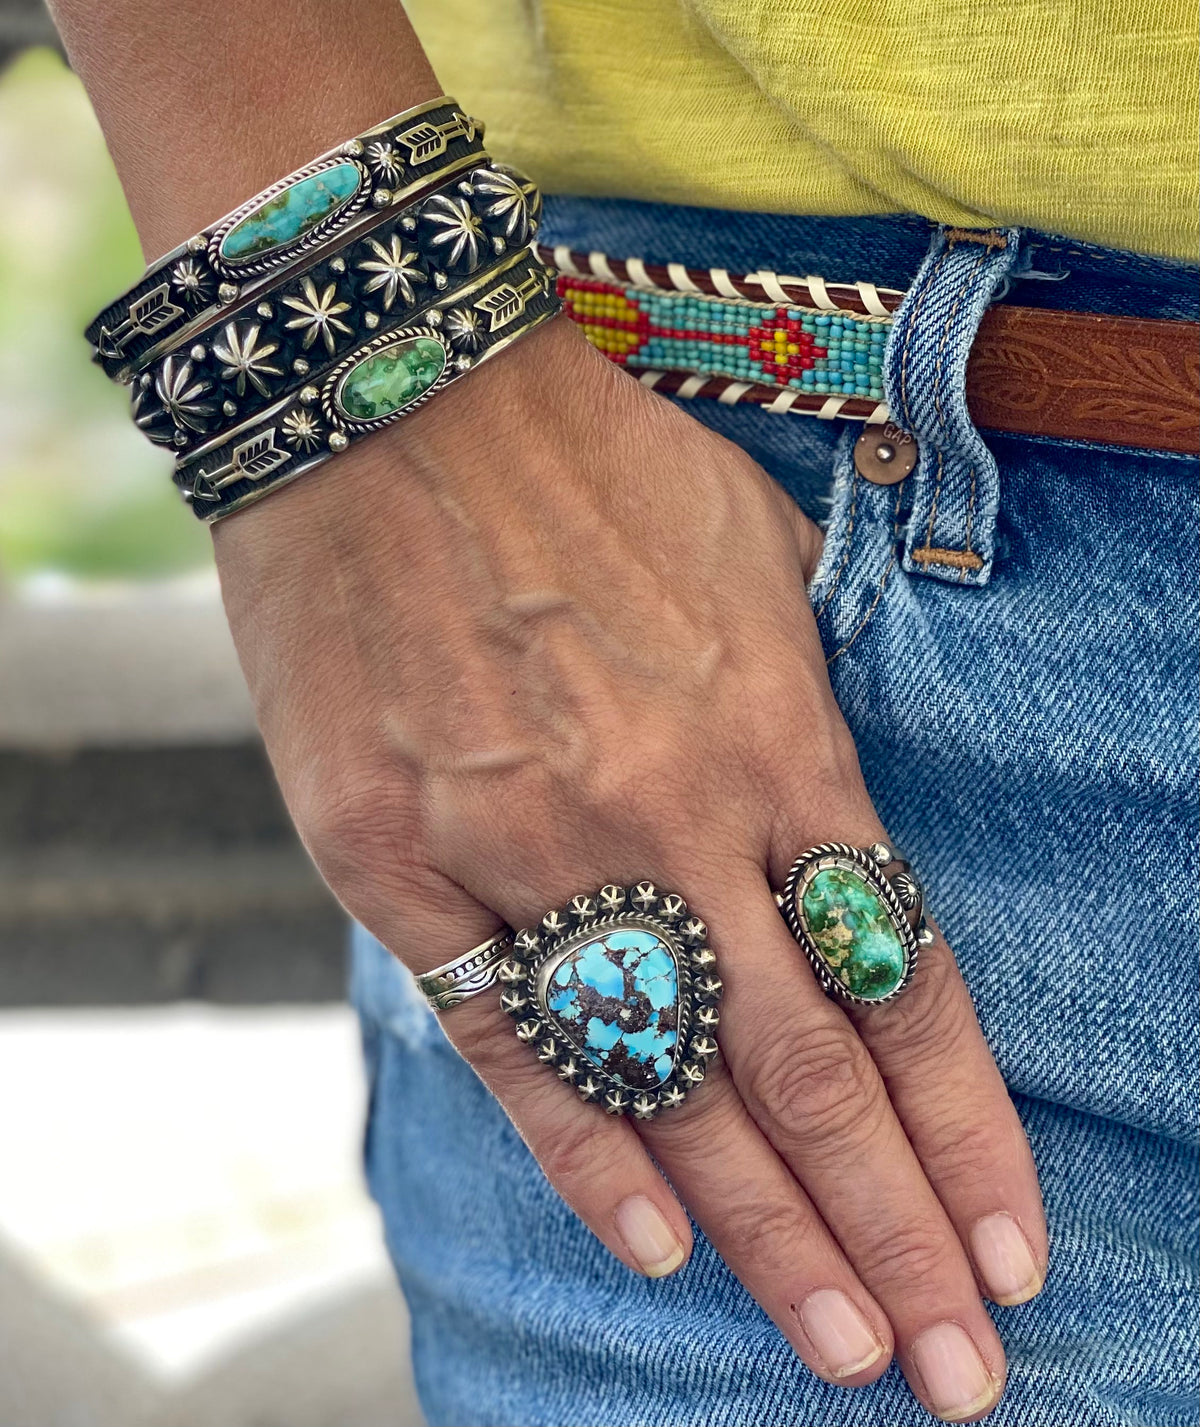 Turquoise Rings and Cuff Bracelets